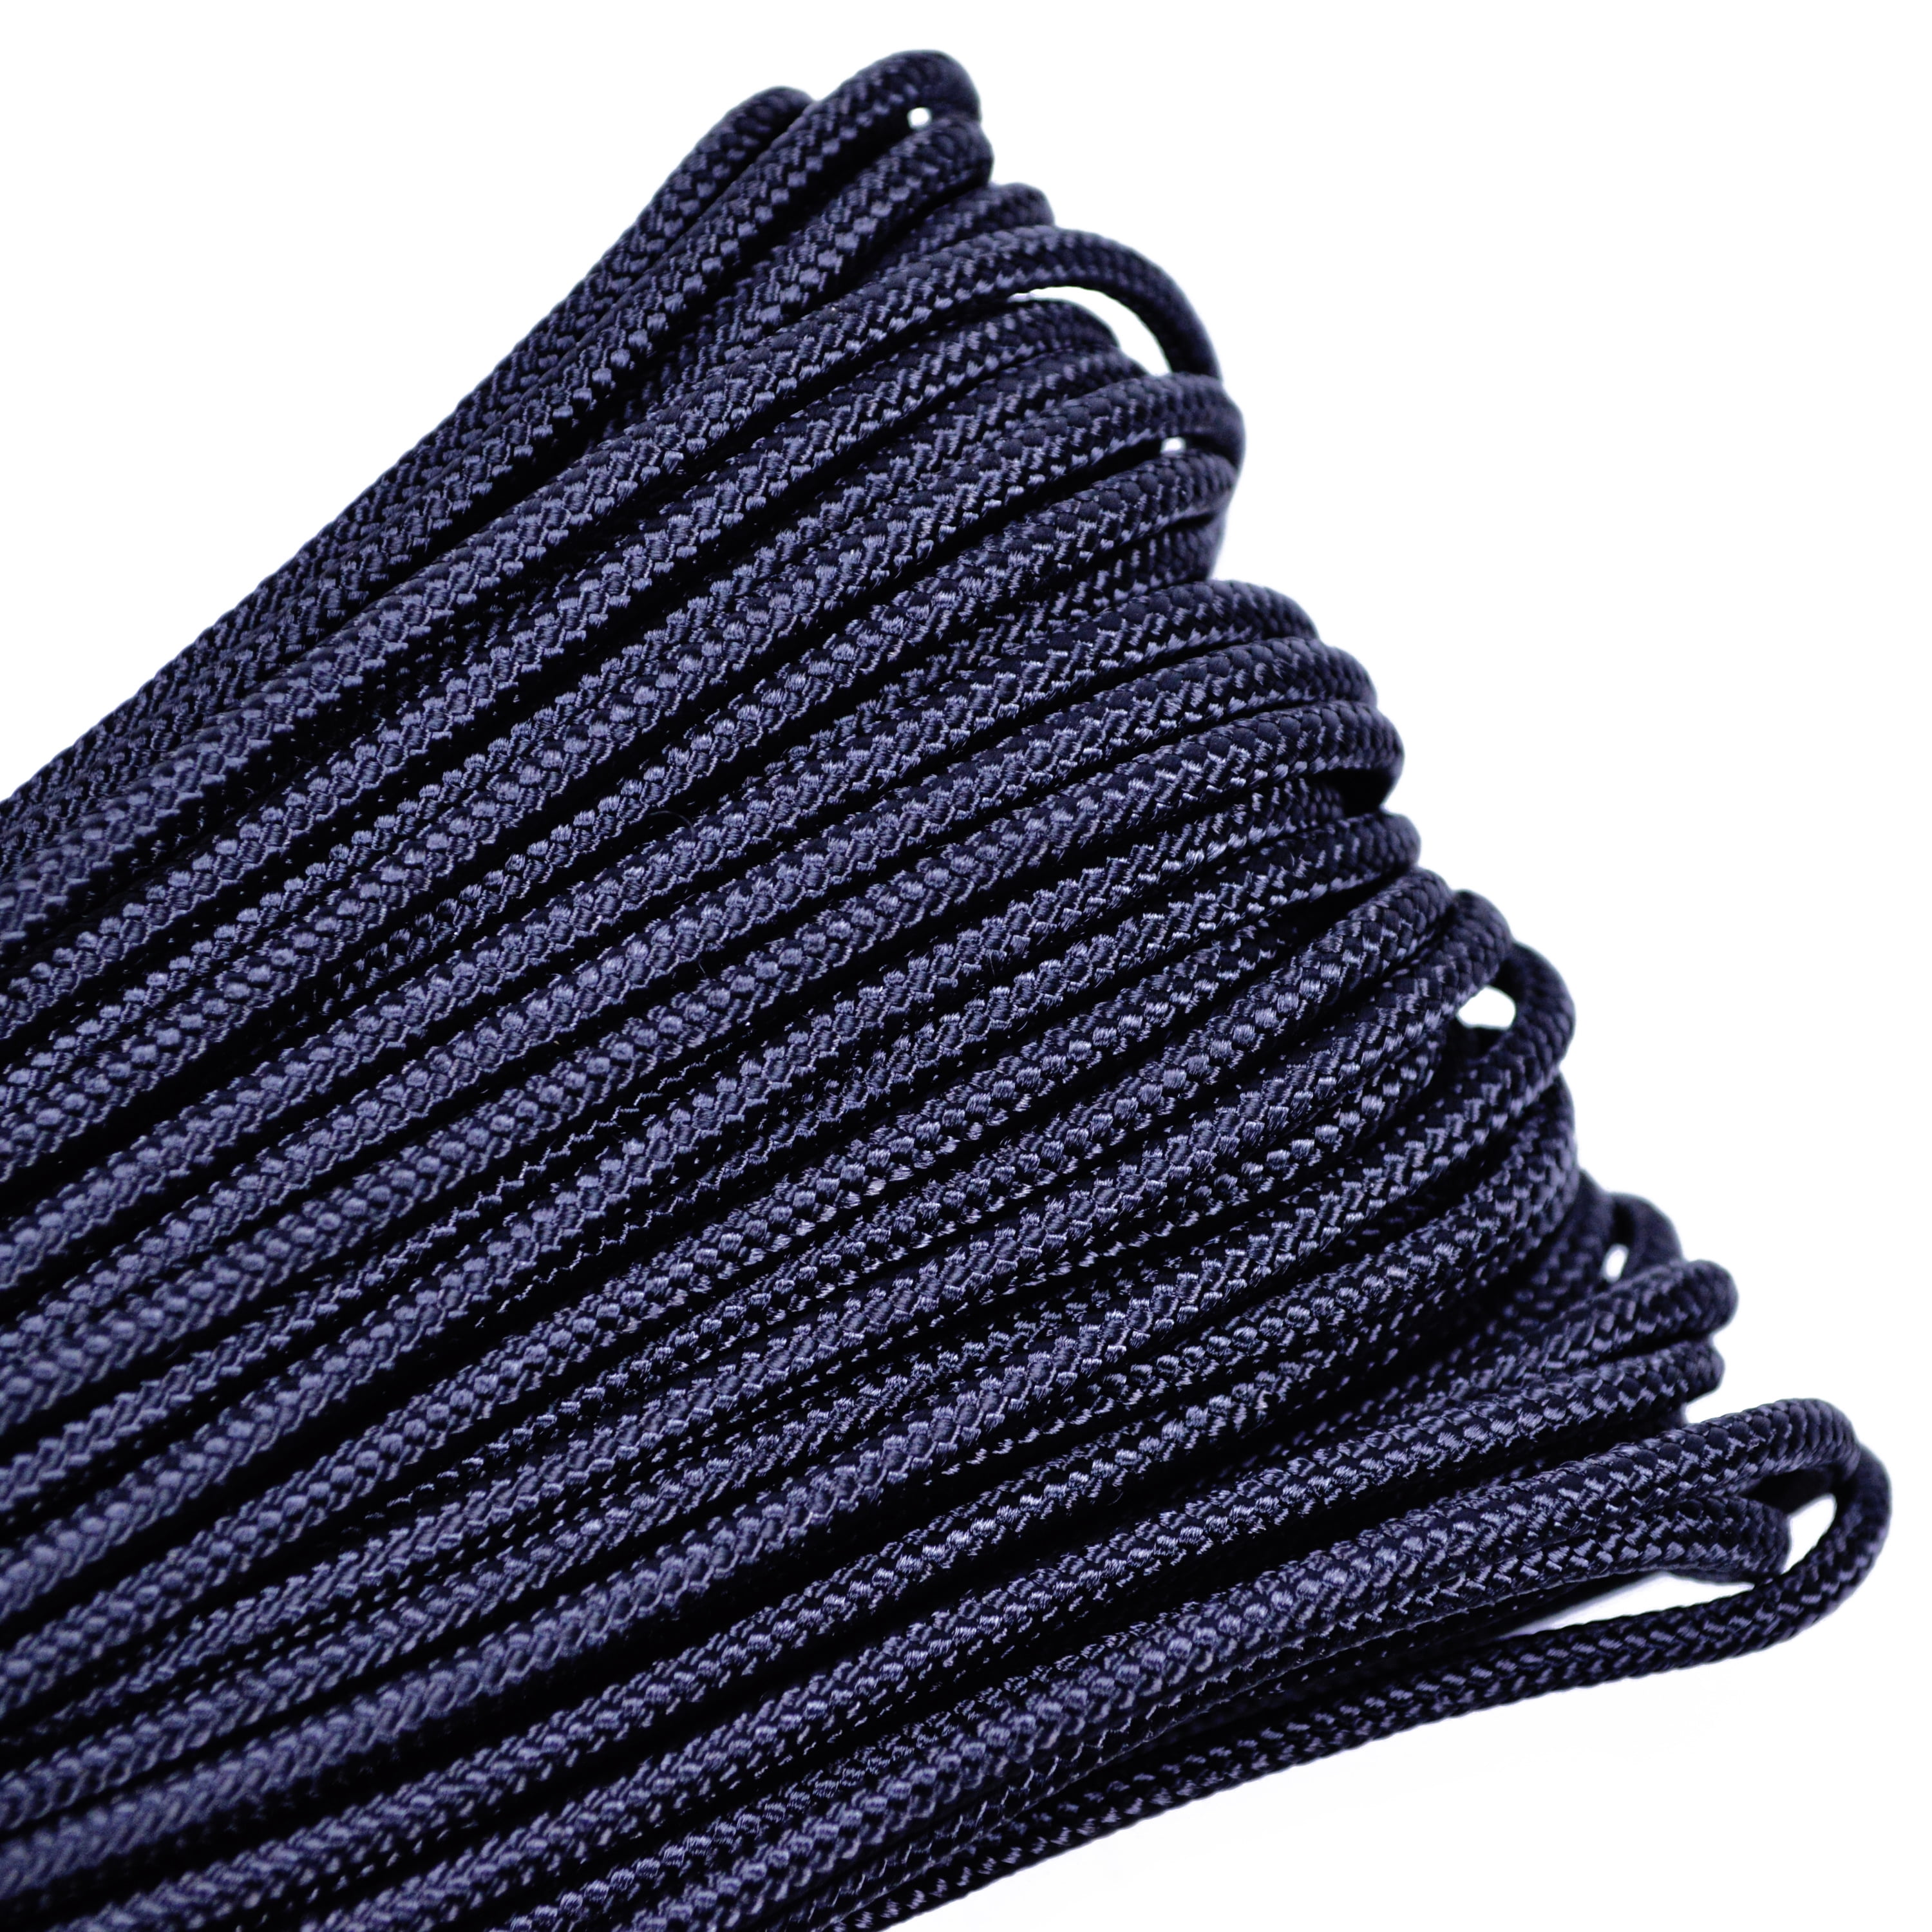 PARACORD PLANET 100' Hanks Parachute 550 Cord Type III 7 Strand Paracord  Top 40 Most Popular Colors (FS Navy Blue)